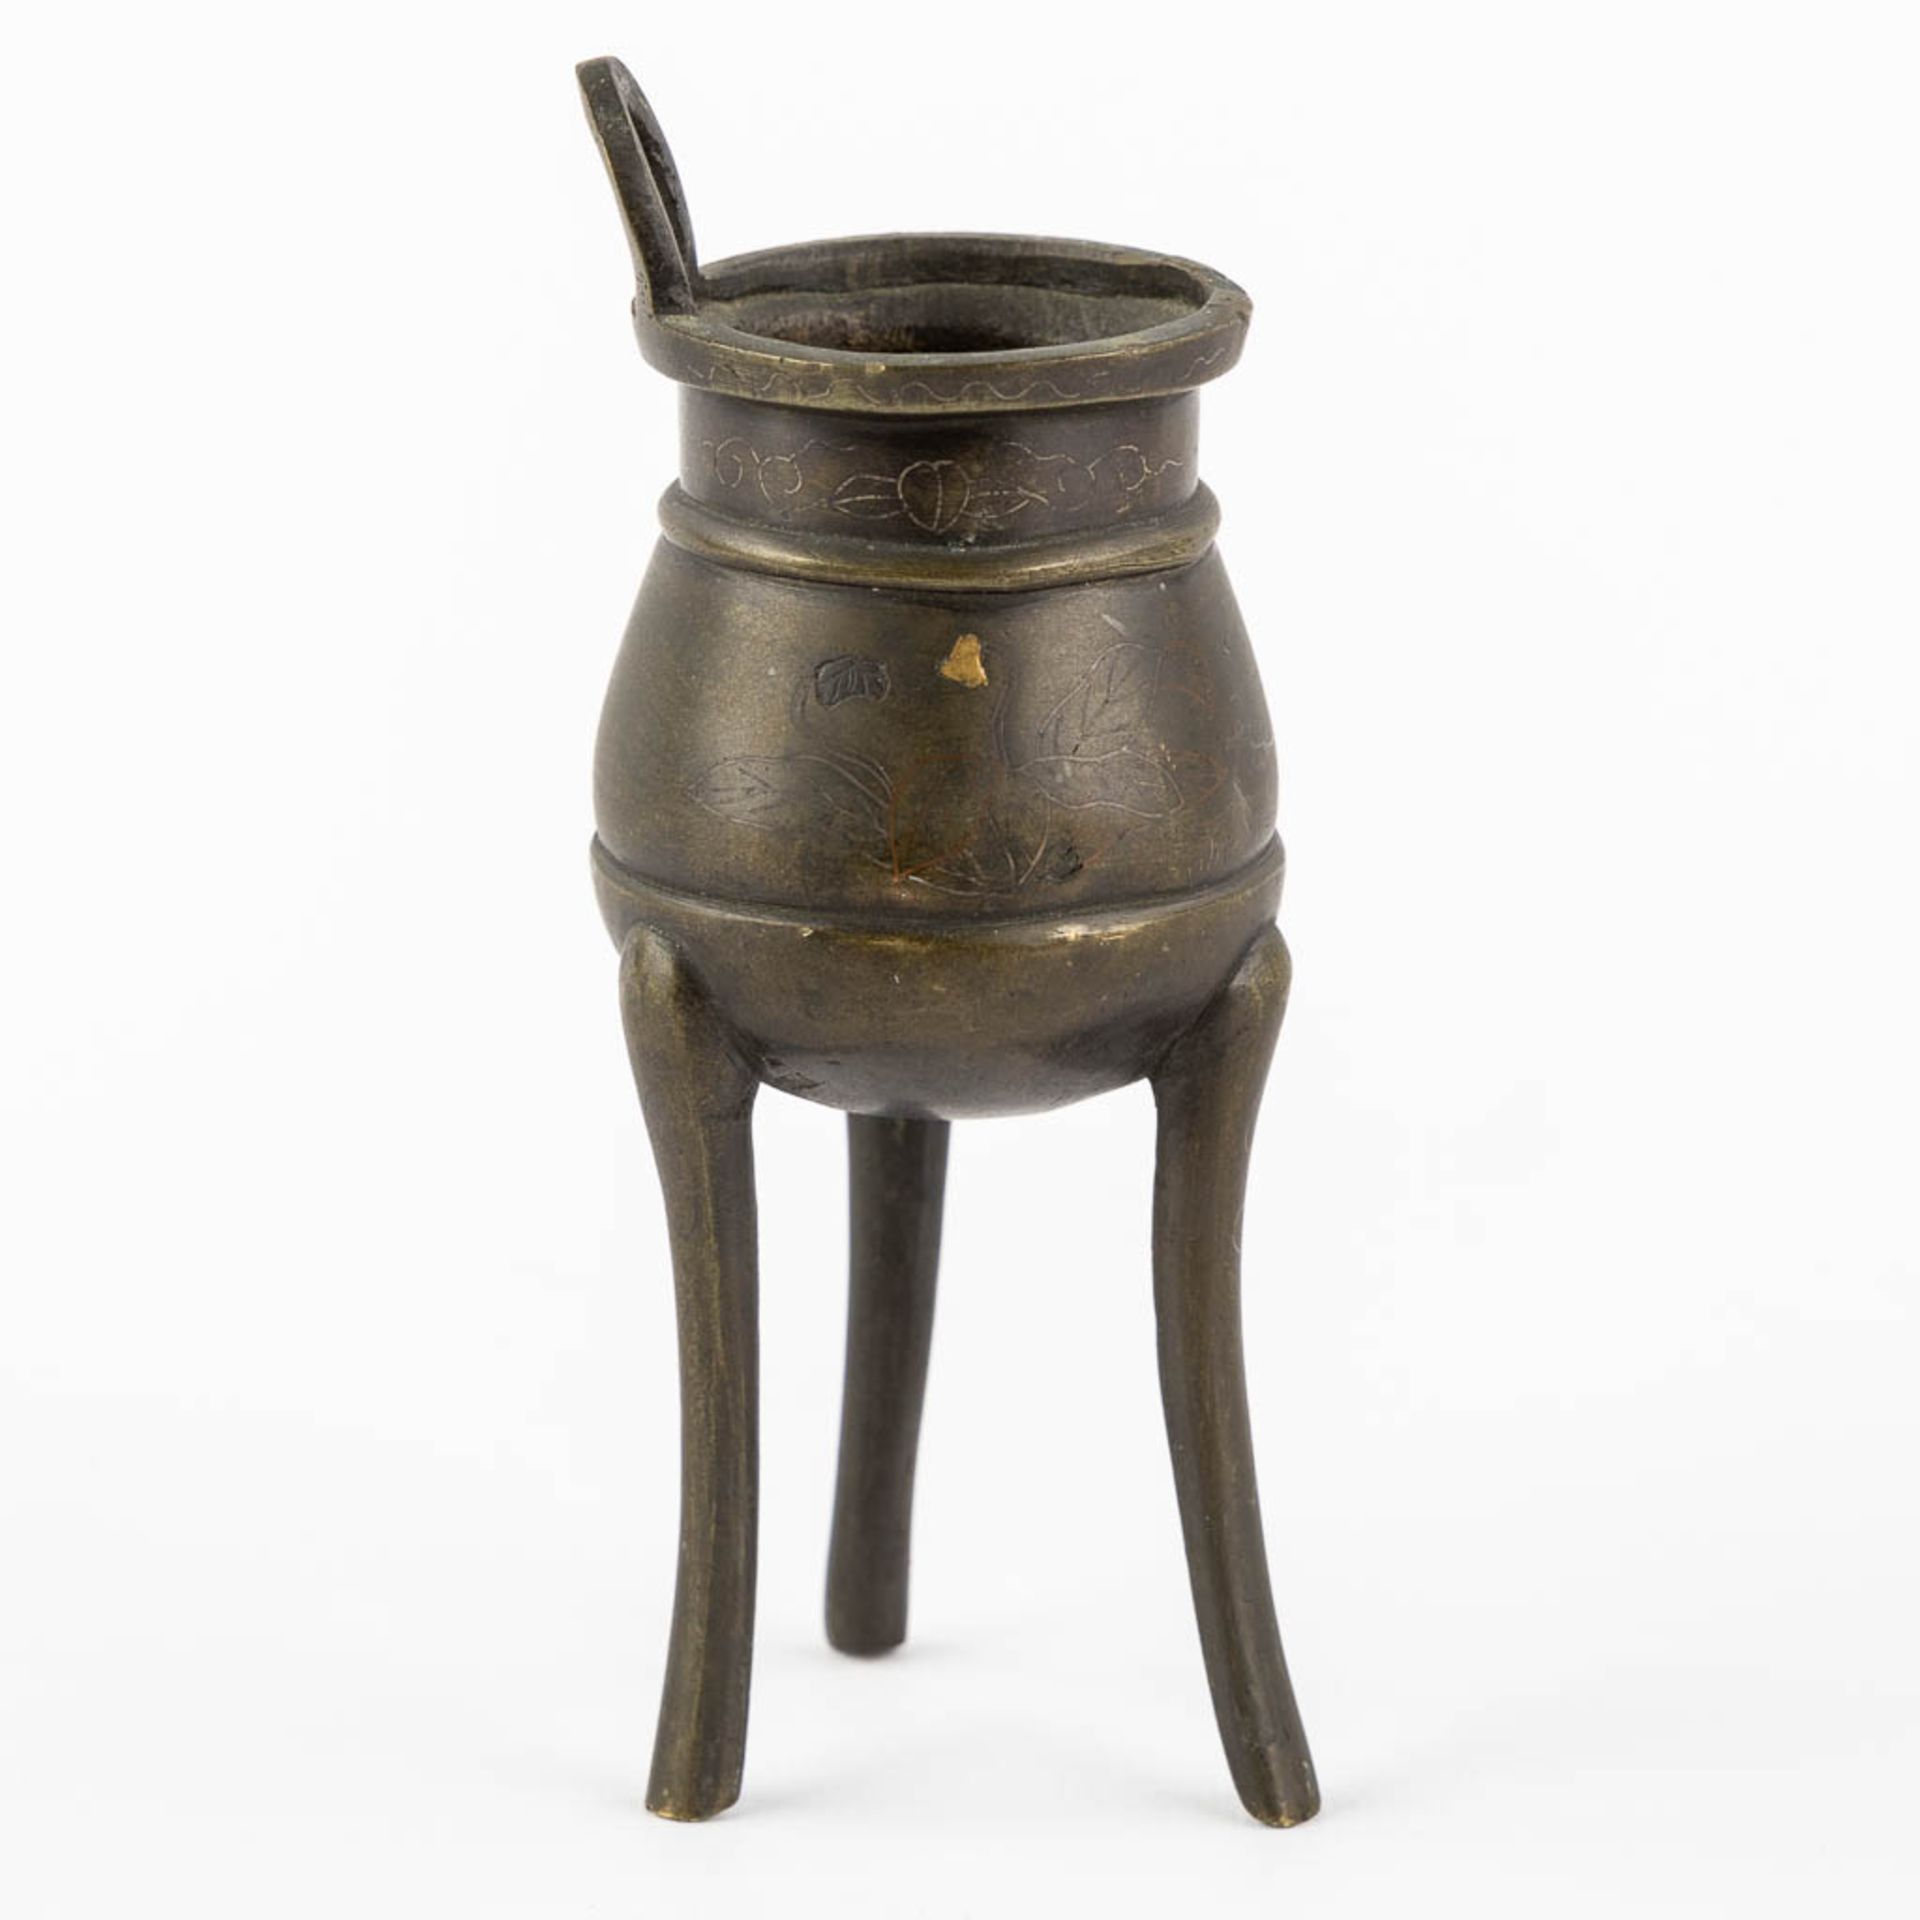 A Chinese insence burner, vase and a lucky coin. Bronze. (H:19 x D:5 cm) - Image 12 of 19